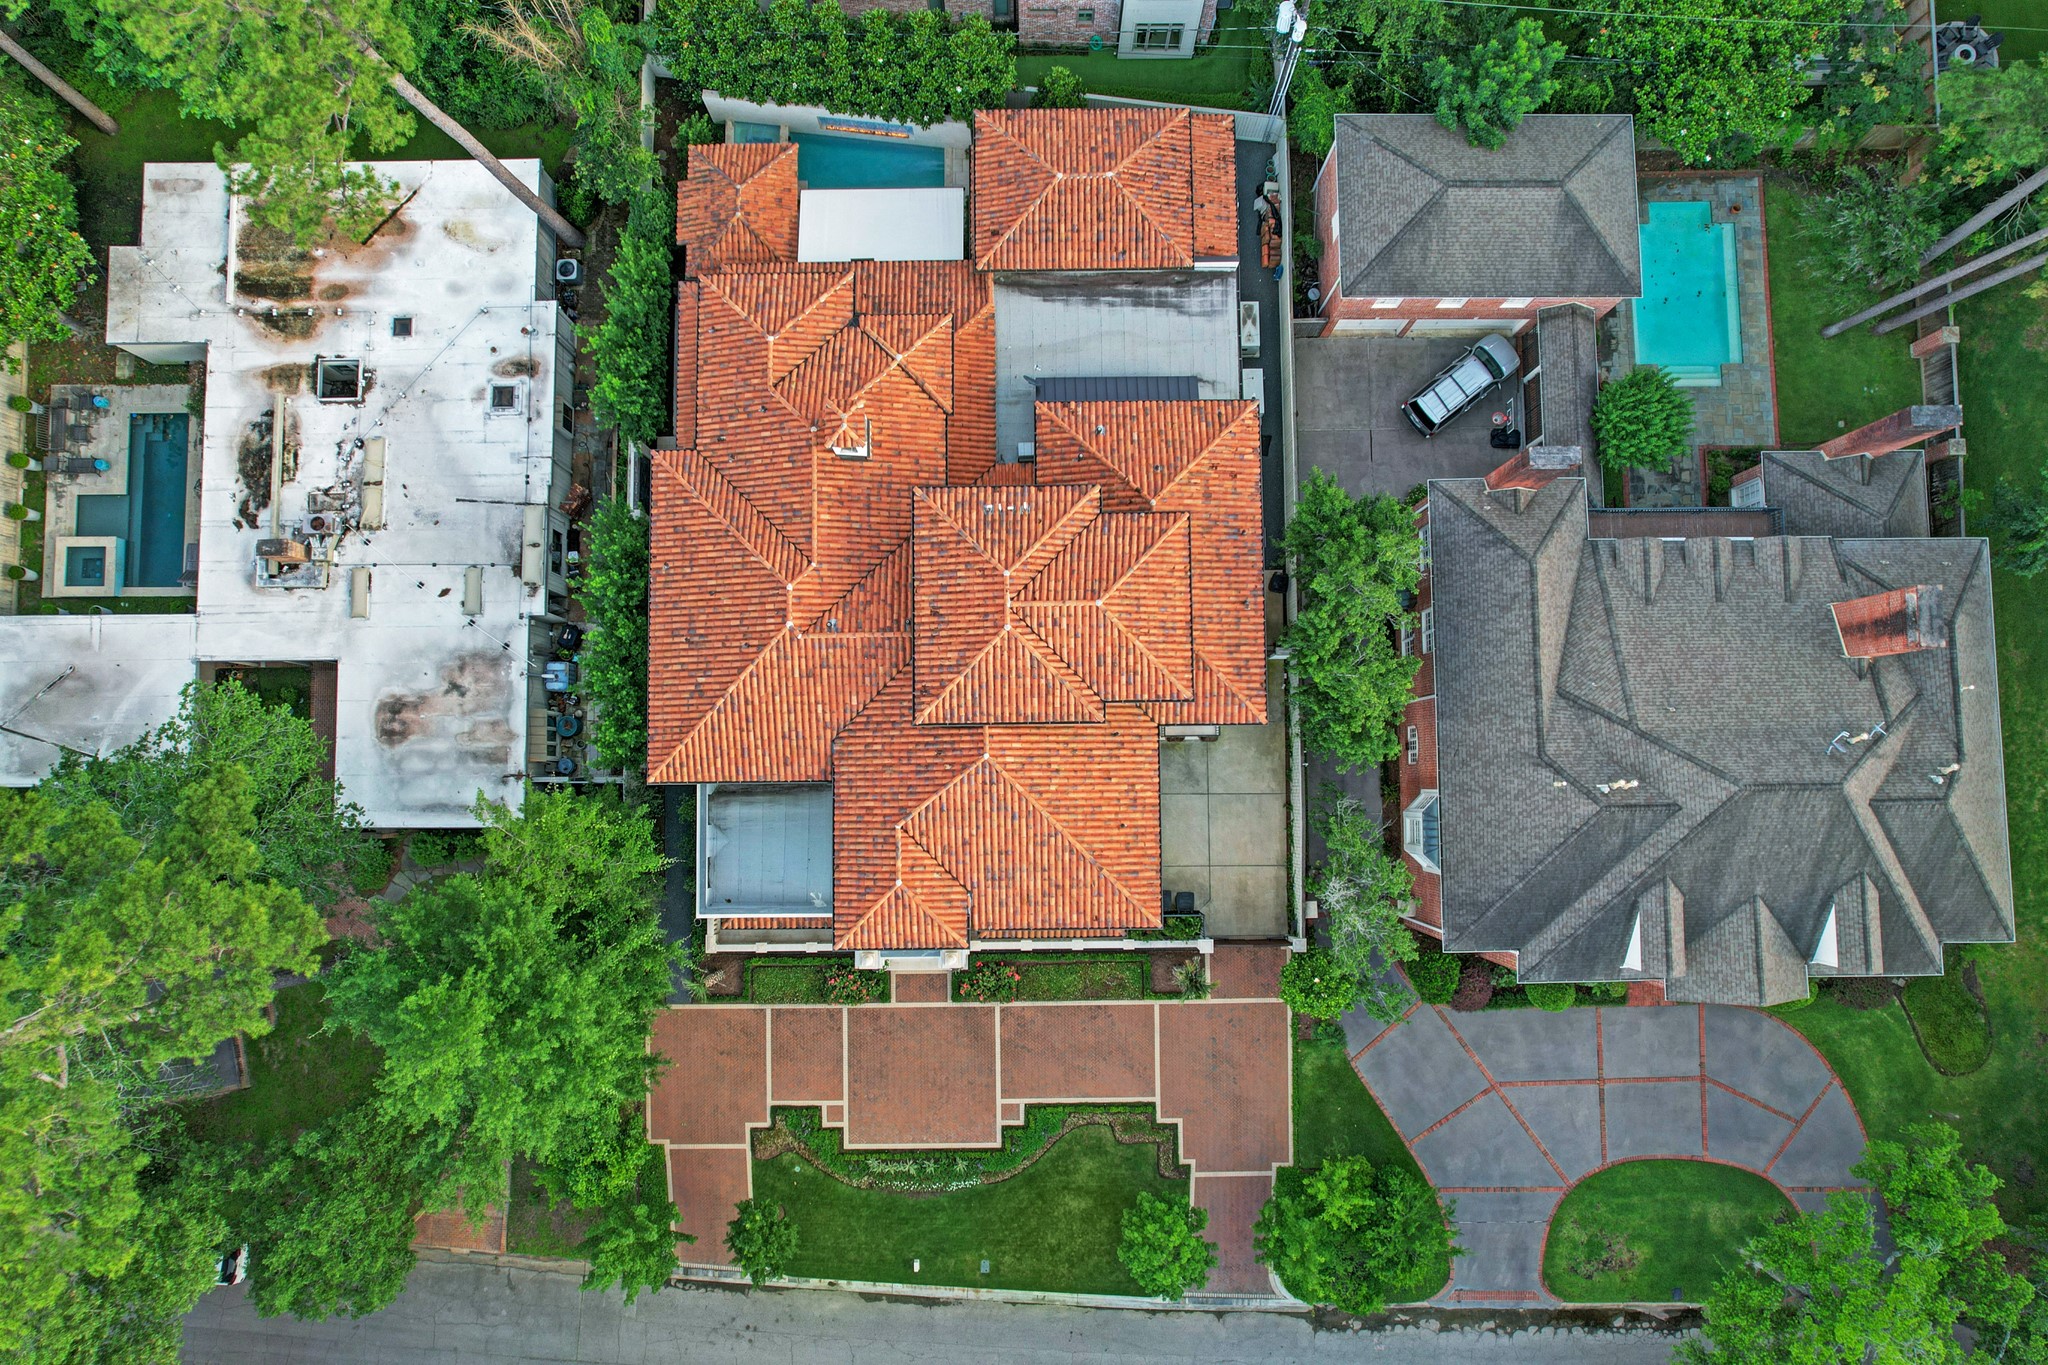 [Aerial View]
Note number 5-rated Mexican terra cotta roof tiles.